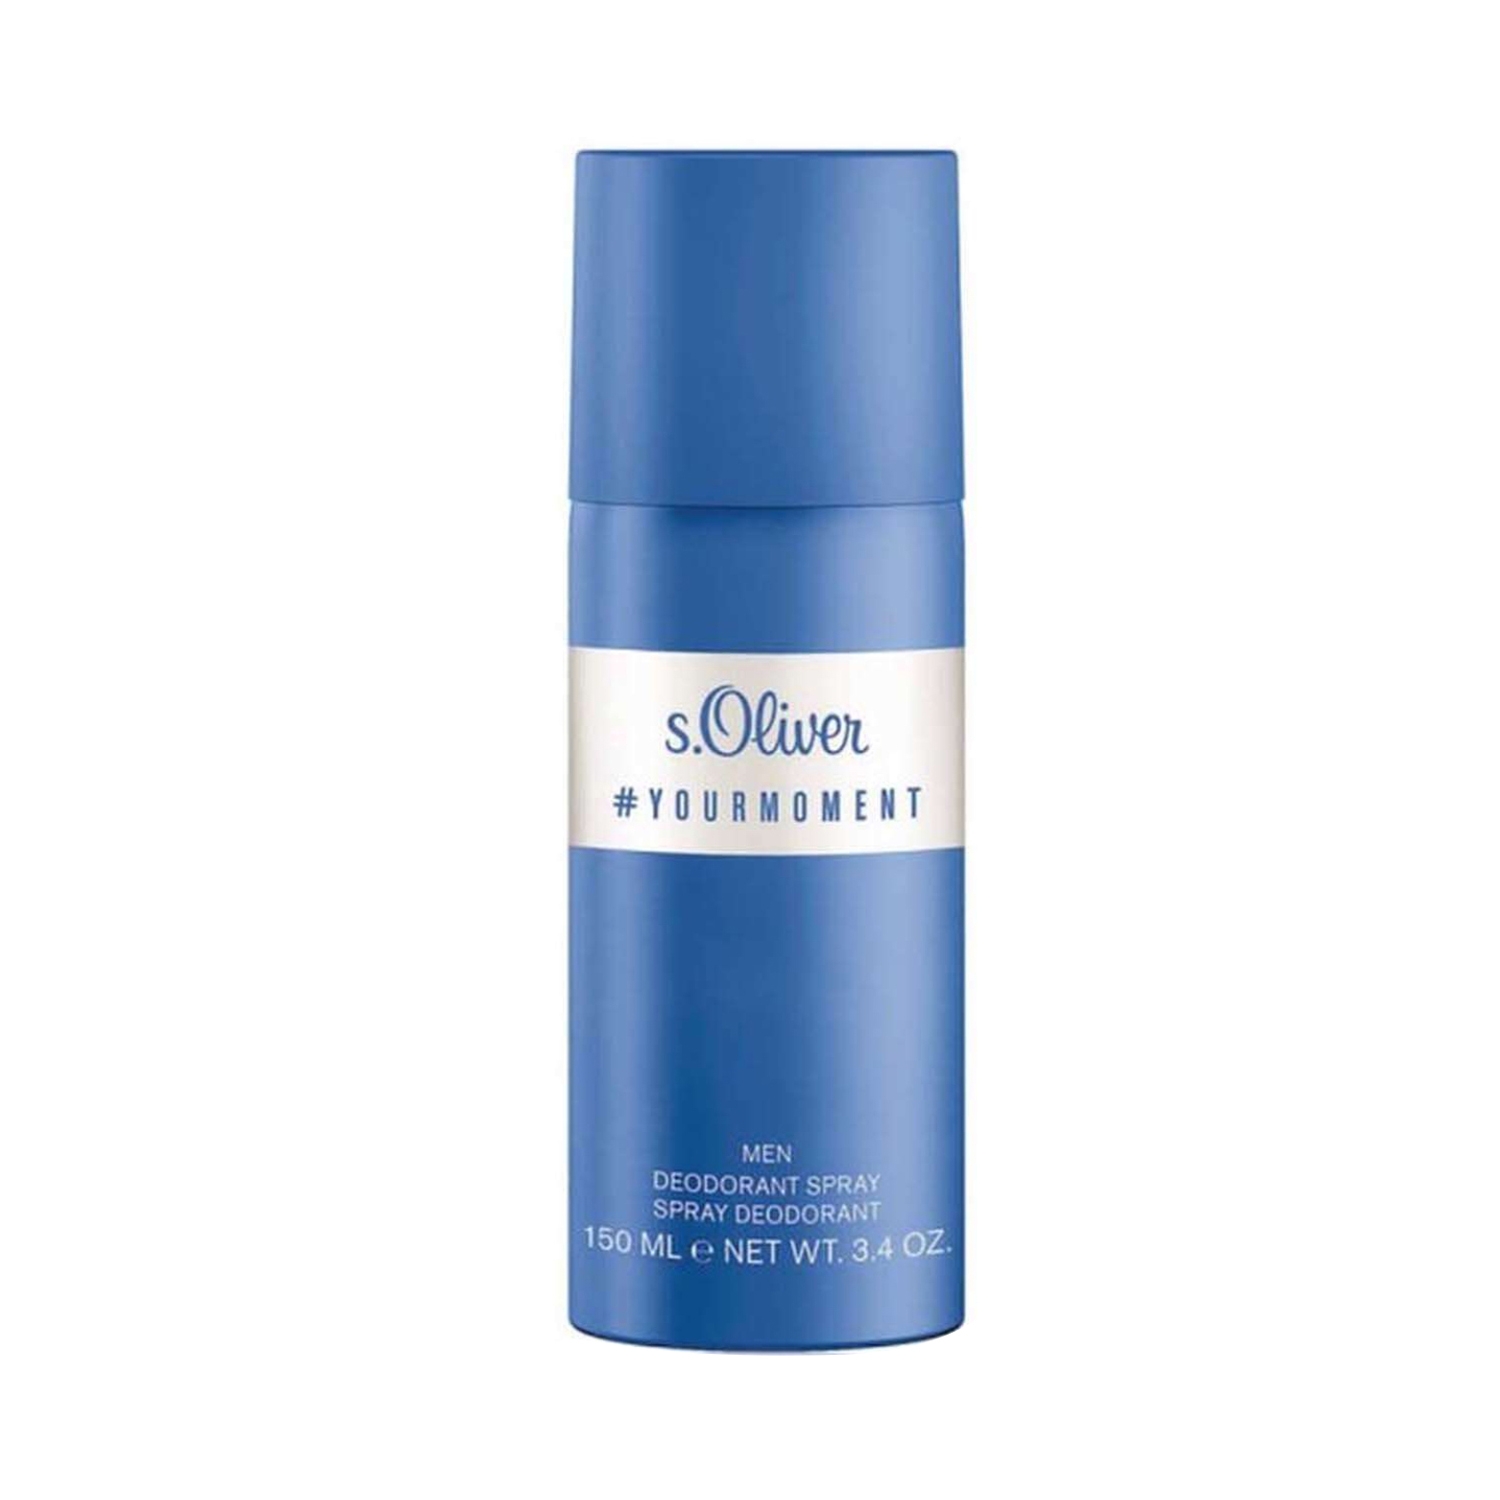 s.Oliver | s.Oliver Your Moment Deodorant Spray (150ml)